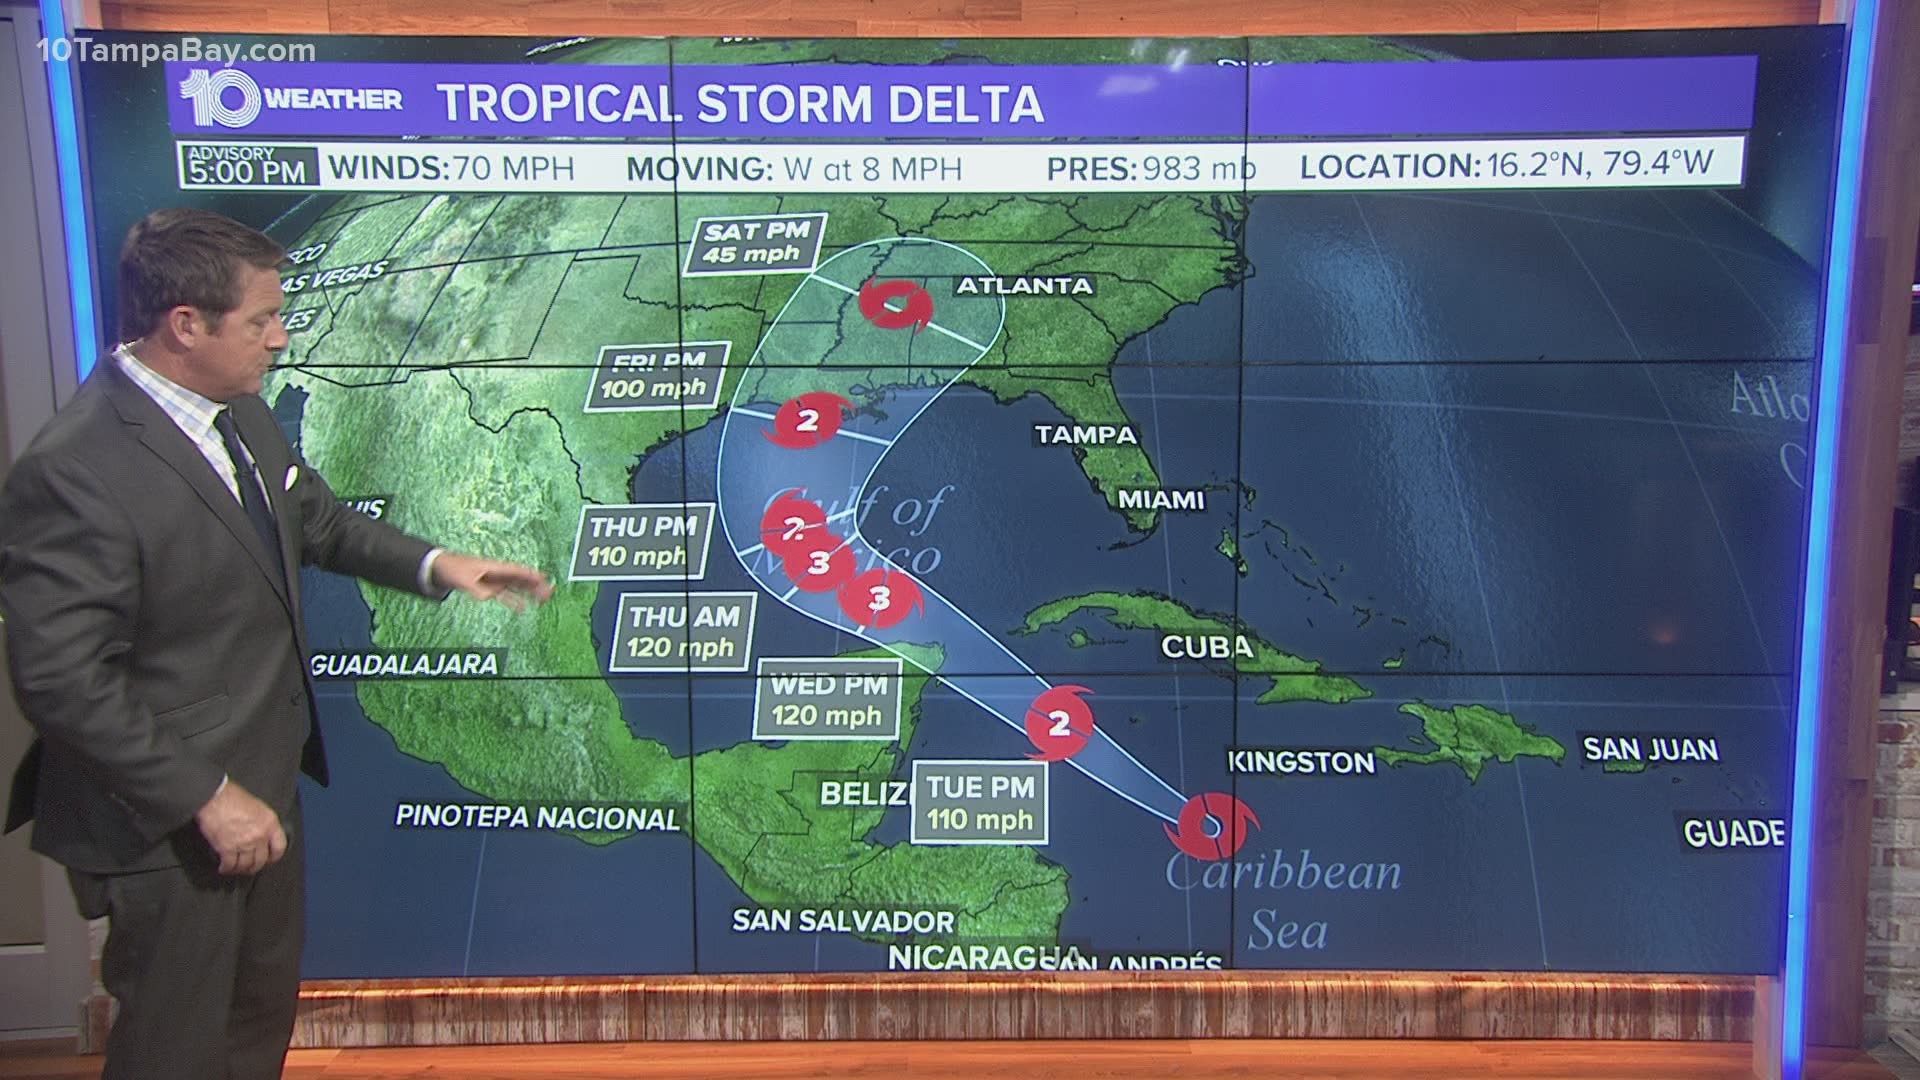 Delta is forecast to make landfall Friday in the central Gulf Coast with 100-mph winds.